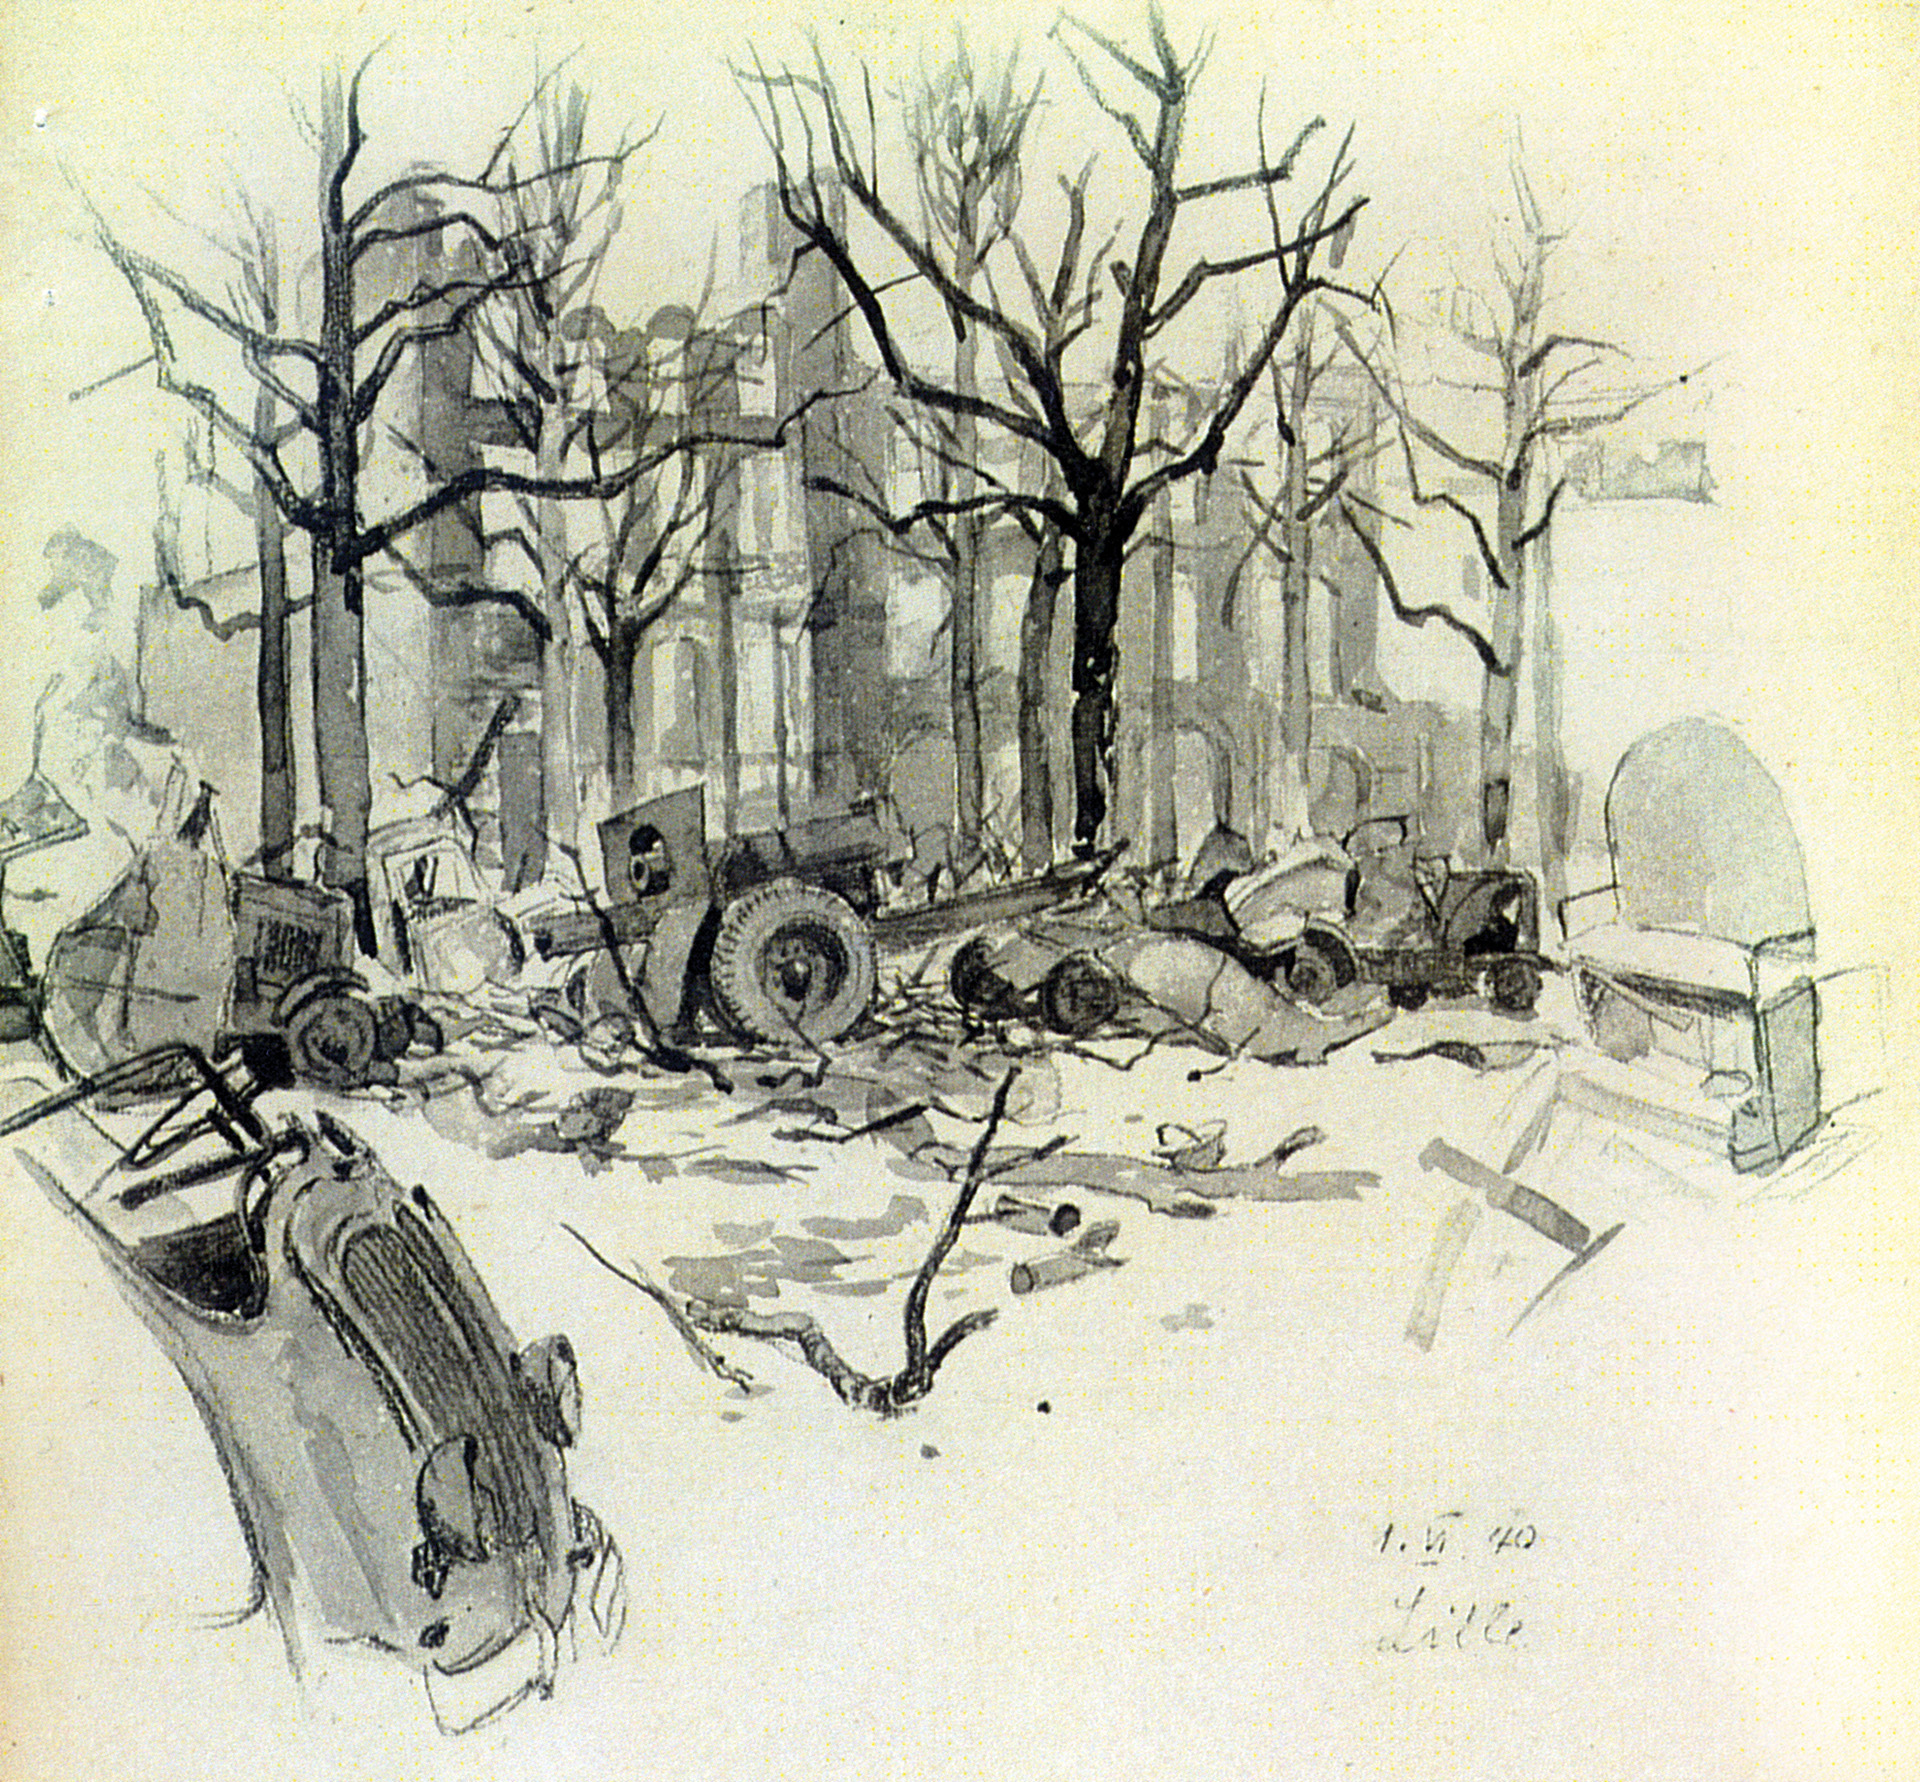 Using watercolors, Eigener portrayed the detritus of a battle: wrecked vehicles, a disabled artilley piece, barren trees, the shell of a building, even a piece of furniture.